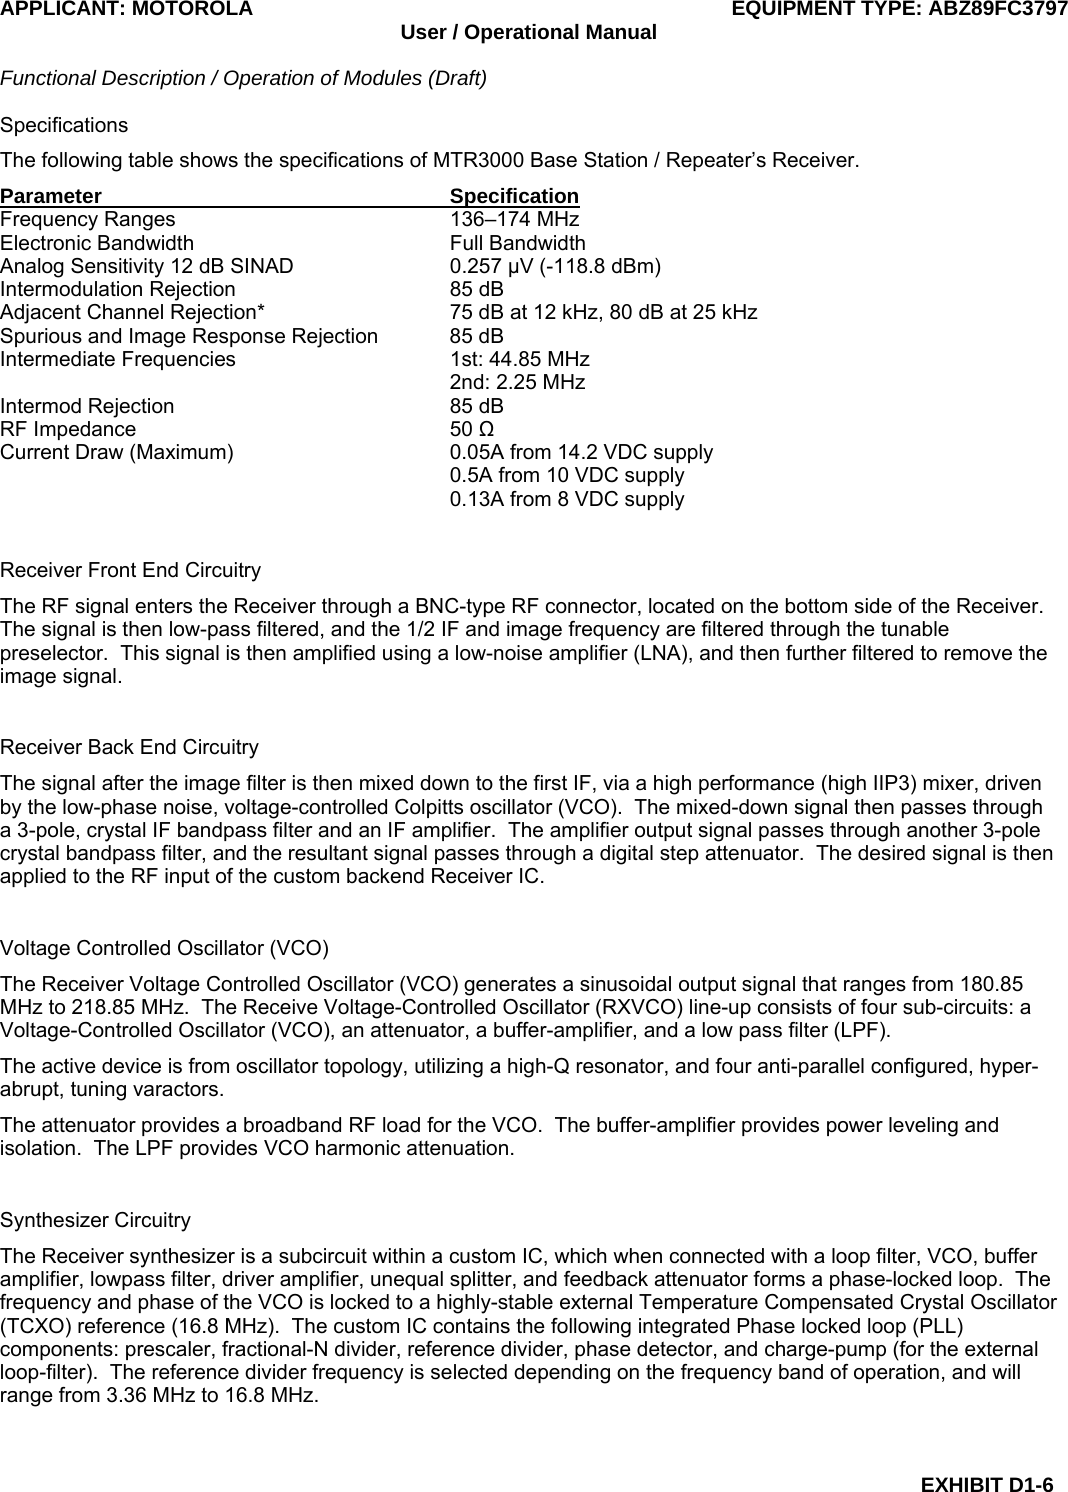 APPLICANT: MOTOROLA  EQUIPMENT TYPE: ABZ89FC3797 User / Operational Manual  Functional Description / Operation of Modules (Draft)  EXHIBIT D1-6 Specifications The following table shows the specifications of MTR3000 Base Station / Repeater’s Receiver. Parameter Specification Frequency Ranges  136–174 MHz Electronic Bandwidth  Full Bandwidth Analog Sensitivity 12 dB SINAD  0.257 μV (-118.8 dBm) Intermodulation Rejection  85 dB Adjacent Channel Rejection*  75 dB at 12 kHz, 80 dB at 25 kHz Spurious and Image Response Rejection  85 dB Intermediate Frequencies  1st: 44.85 MHz   2nd: 2.25 MHz Intermod Rejection  85 dB RF Impedance  50 Ω Current Draw (Maximum)  0.05A from 14.2 VDC supply   0.5A from 10 VDC supply   0.13A from 8 VDC supply  Receiver Front End Circuitry The RF signal enters the Receiver through a BNC-type RF connector, located on the bottom side of the Receiver.  The signal is then low-pass filtered, and the 1/2 IF and image frequency are filtered through the tunable preselector.  This signal is then amplified using a low-noise amplifier (LNA), and then further filtered to remove the image signal.  Receiver Back End Circuitry The signal after the image filter is then mixed down to the first IF, via a high performance (high IIP3) mixer, driven by the low-phase noise, voltage-controlled Colpitts oscillator (VCO).  The mixed-down signal then passes through a 3-pole, crystal IF bandpass filter and an IF amplifier.  The amplifier output signal passes through another 3-pole crystal bandpass filter, and the resultant signal passes through a digital step attenuator.  The desired signal is then applied to the RF input of the custom backend Receiver IC.  Voltage Controlled Oscillator (VCO) The Receiver Voltage Controlled Oscillator (VCO) generates a sinusoidal output signal that ranges from 180.85 MHz to 218.85 MHz.  The Receive Voltage-Controlled Oscillator (RXVCO) line-up consists of four sub-circuits: a Voltage-Controlled Oscillator (VCO), an attenuator, a buffer-amplifier, and a low pass filter (LPF). The active device is from oscillator topology, utilizing a high-Q resonator, and four anti-parallel configured, hyper-abrupt, tuning varactors. The attenuator provides a broadband RF load for the VCO.  The buffer-amplifier provides power leveling and isolation.  The LPF provides VCO harmonic attenuation.  Synthesizer Circuitry The Receiver synthesizer is a subcircuit within a custom IC, which when connected with a loop filter, VCO, buffer amplifier, lowpass filter, driver amplifier, unequal splitter, and feedback attenuator forms a phase-locked loop.  The frequency and phase of the VCO is locked to a highly-stable external Temperature Compensated Crystal Oscillator (TCXO) reference (16.8 MHz).  The custom IC contains the following integrated Phase locked loop (PLL) components: prescaler, fractional-N divider, reference divider, phase detector, and charge-pump (for the external loop-filter).  The reference divider frequency is selected depending on the frequency band of operation, and will range from 3.36 MHz to 16.8 MHz.  